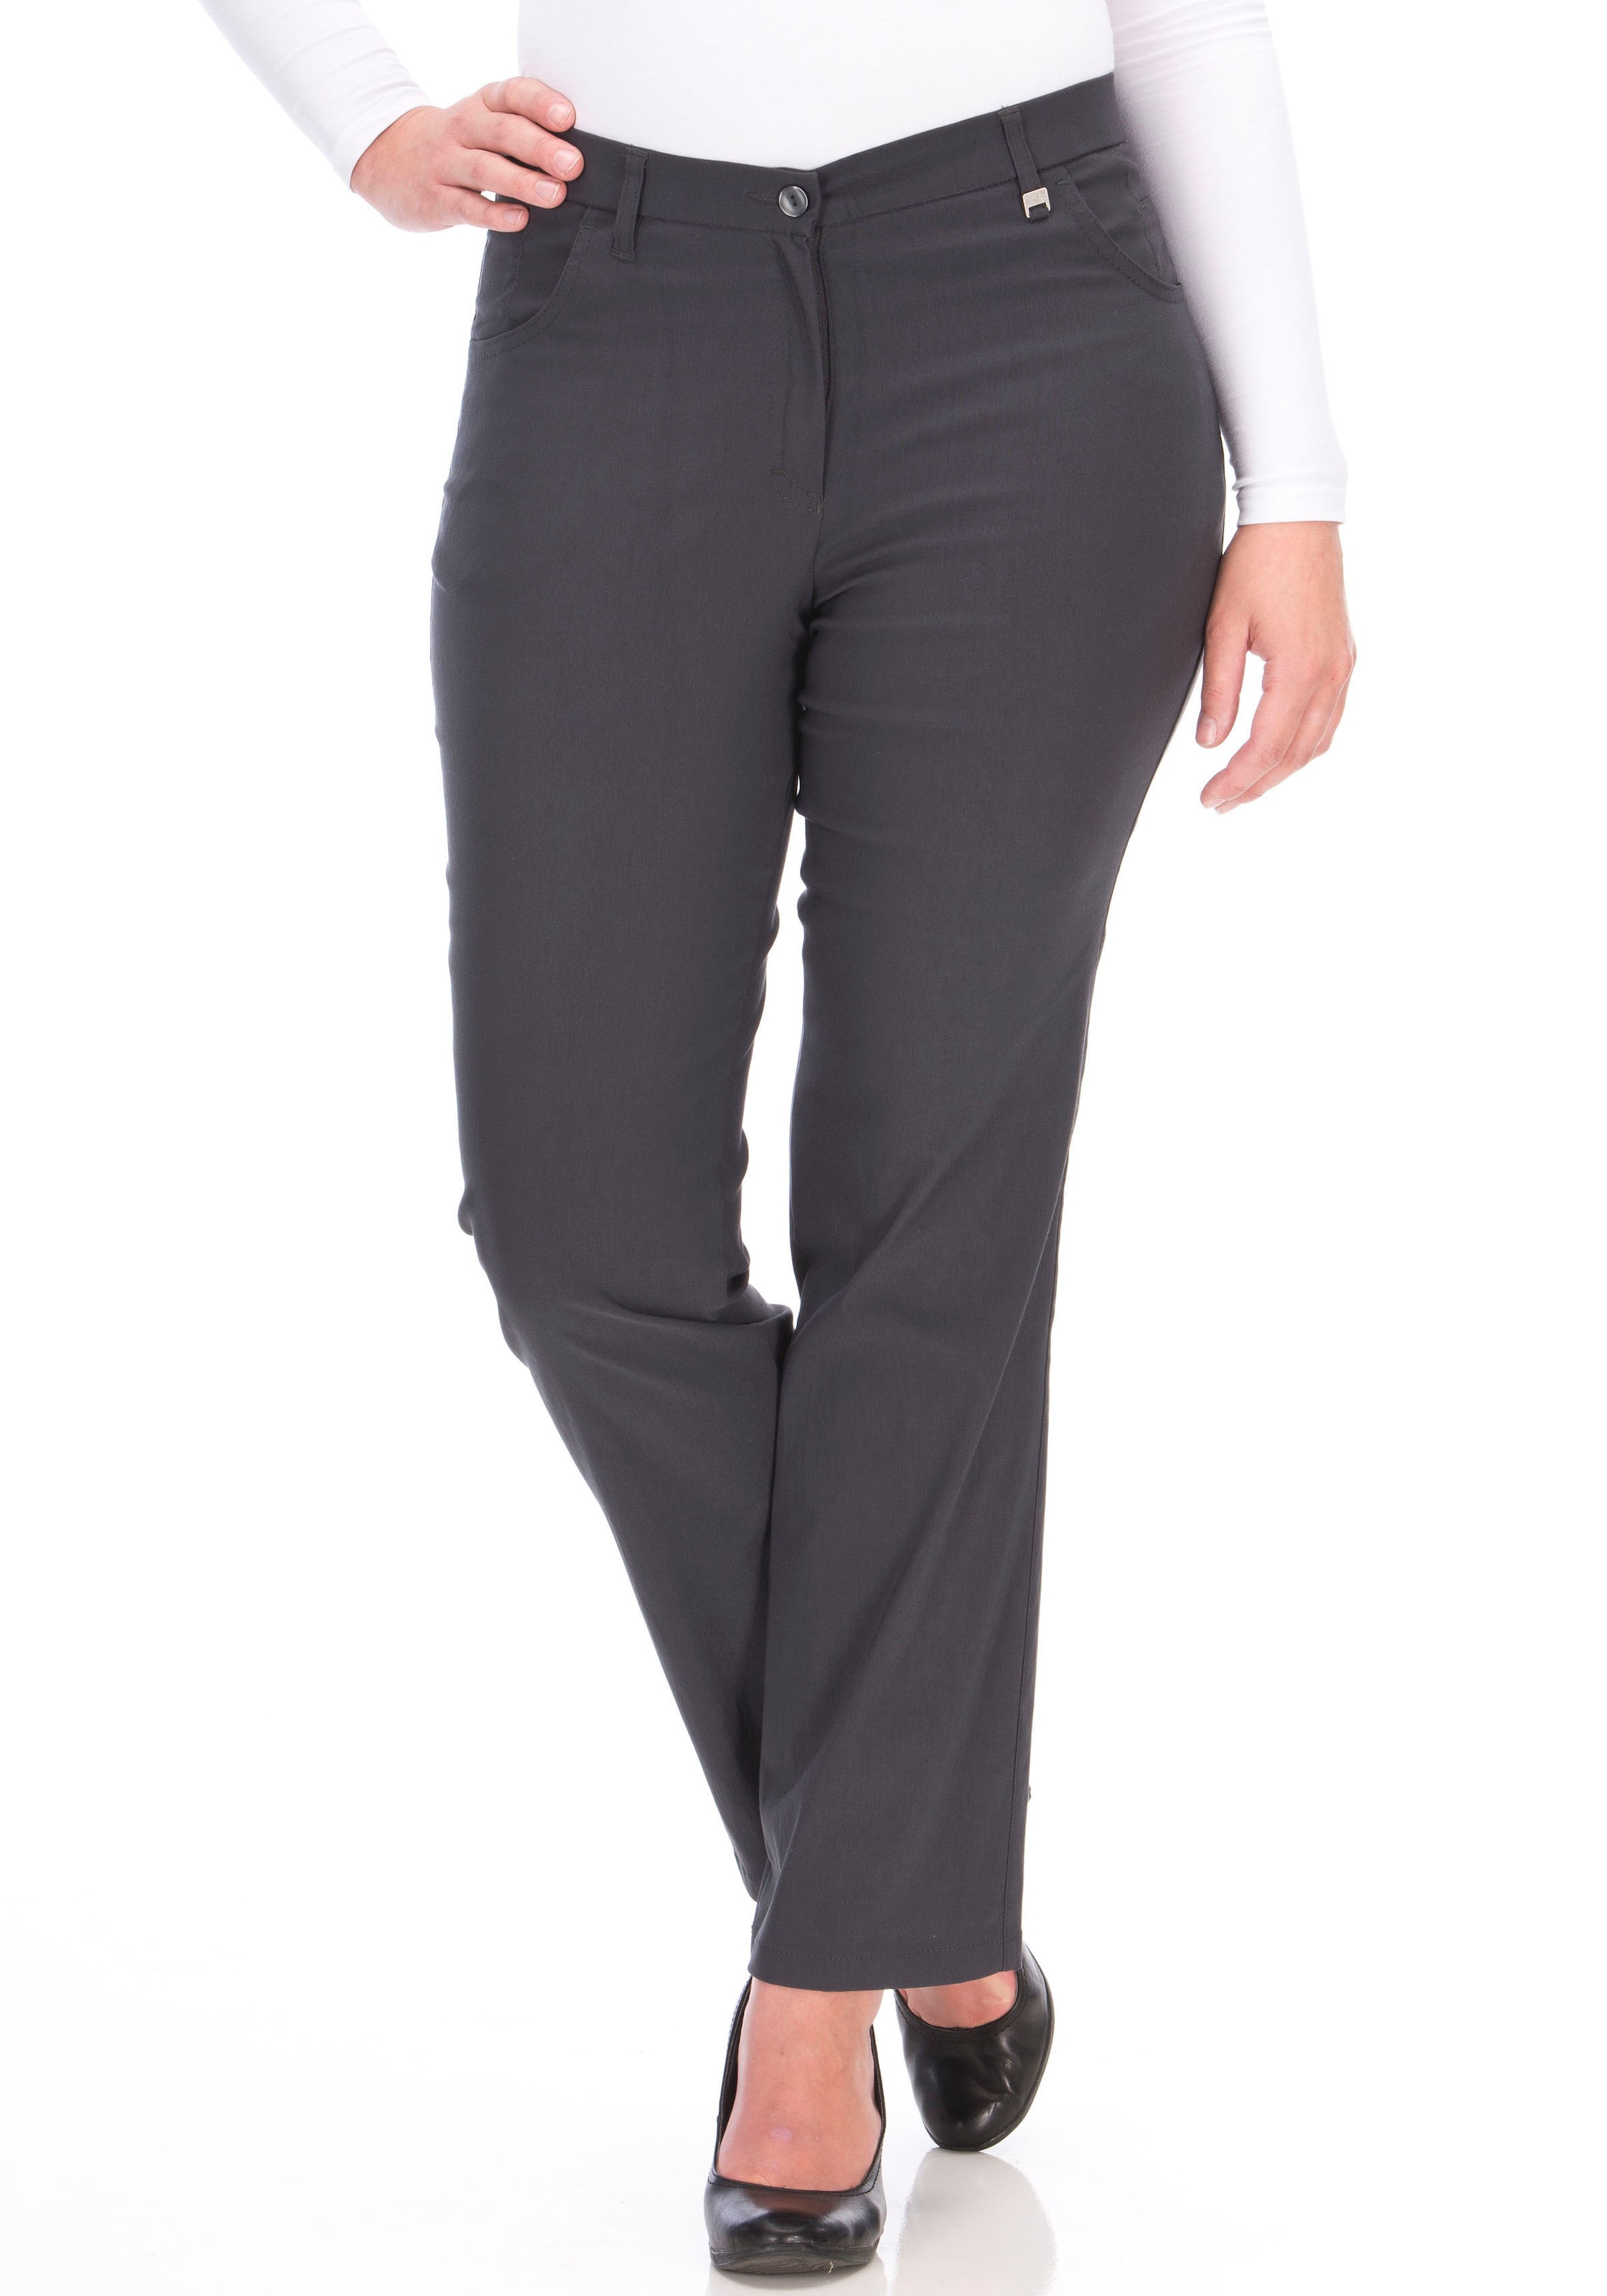 5-Pocket-Hose »Betty Bengaline«, in bequemer Form